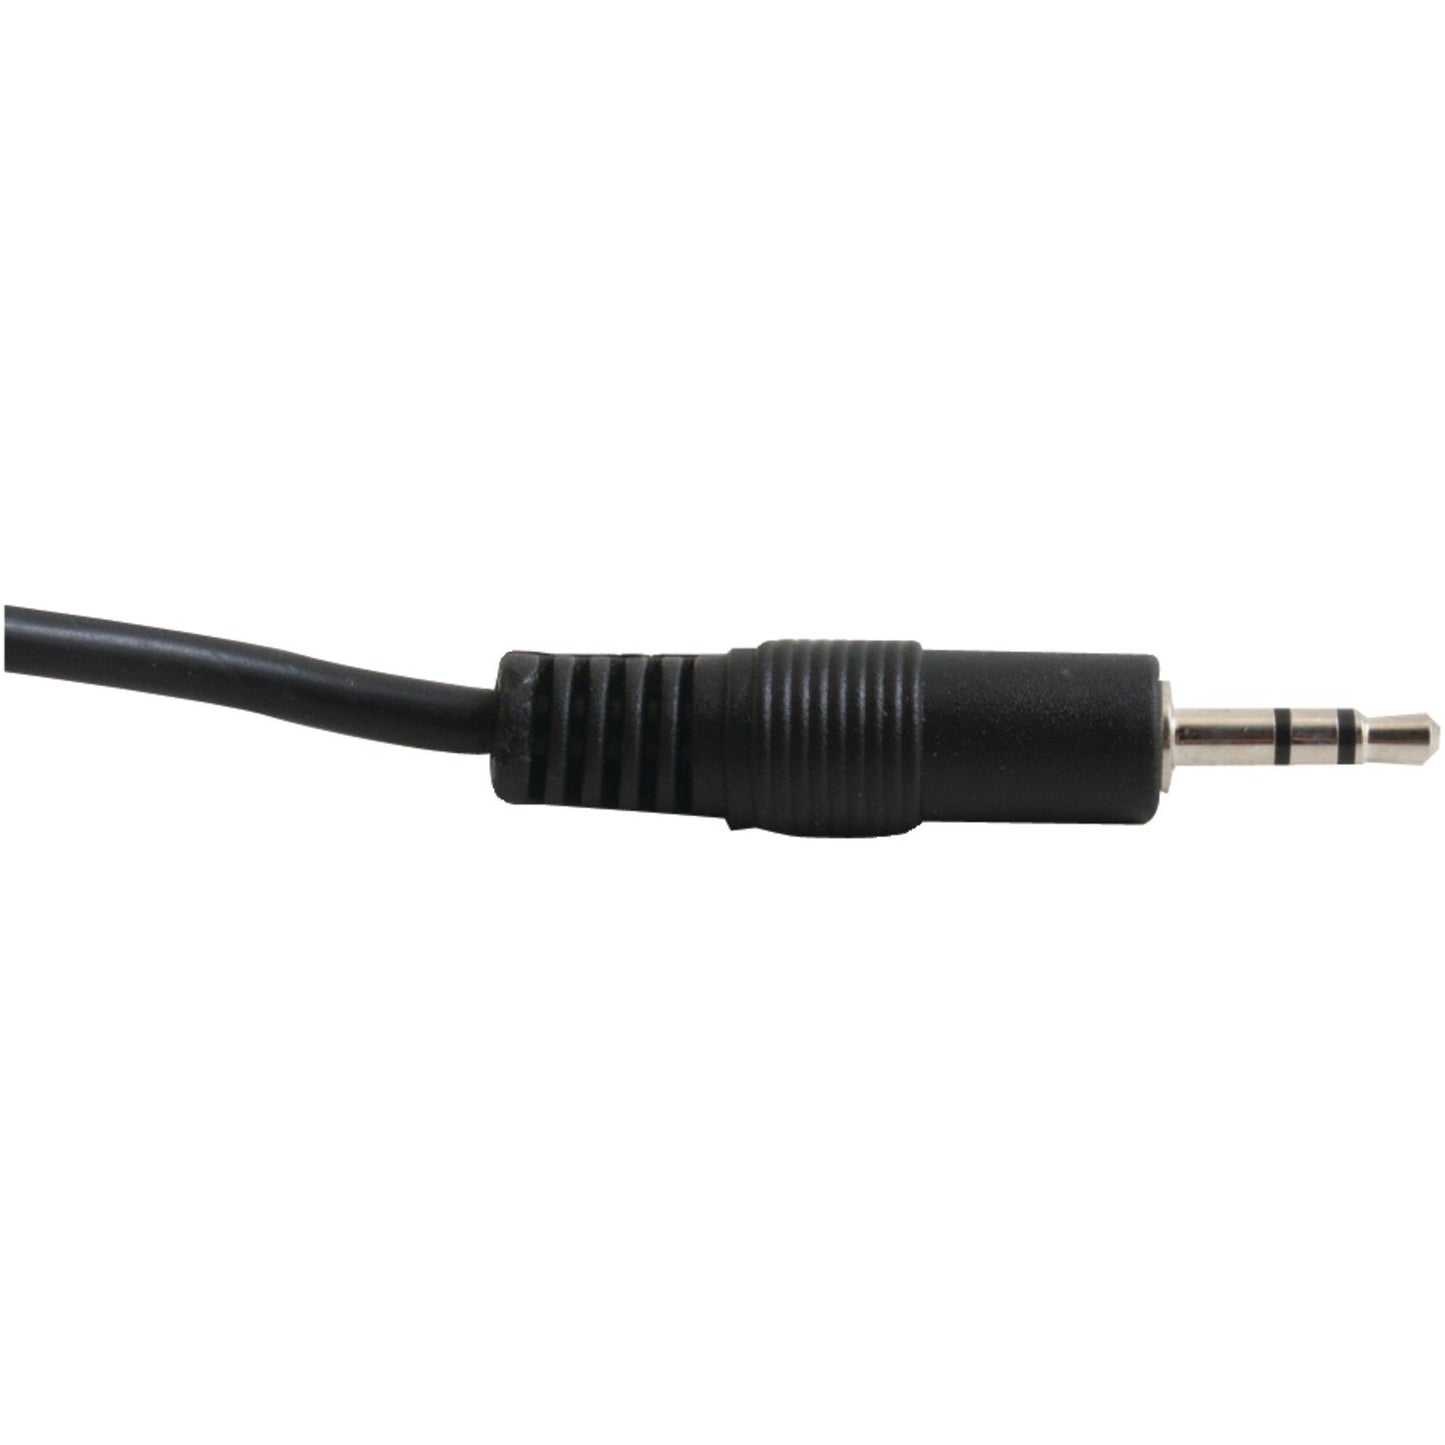 AXIS PET13-1020 Cable 3.5Mm Plugs 3'